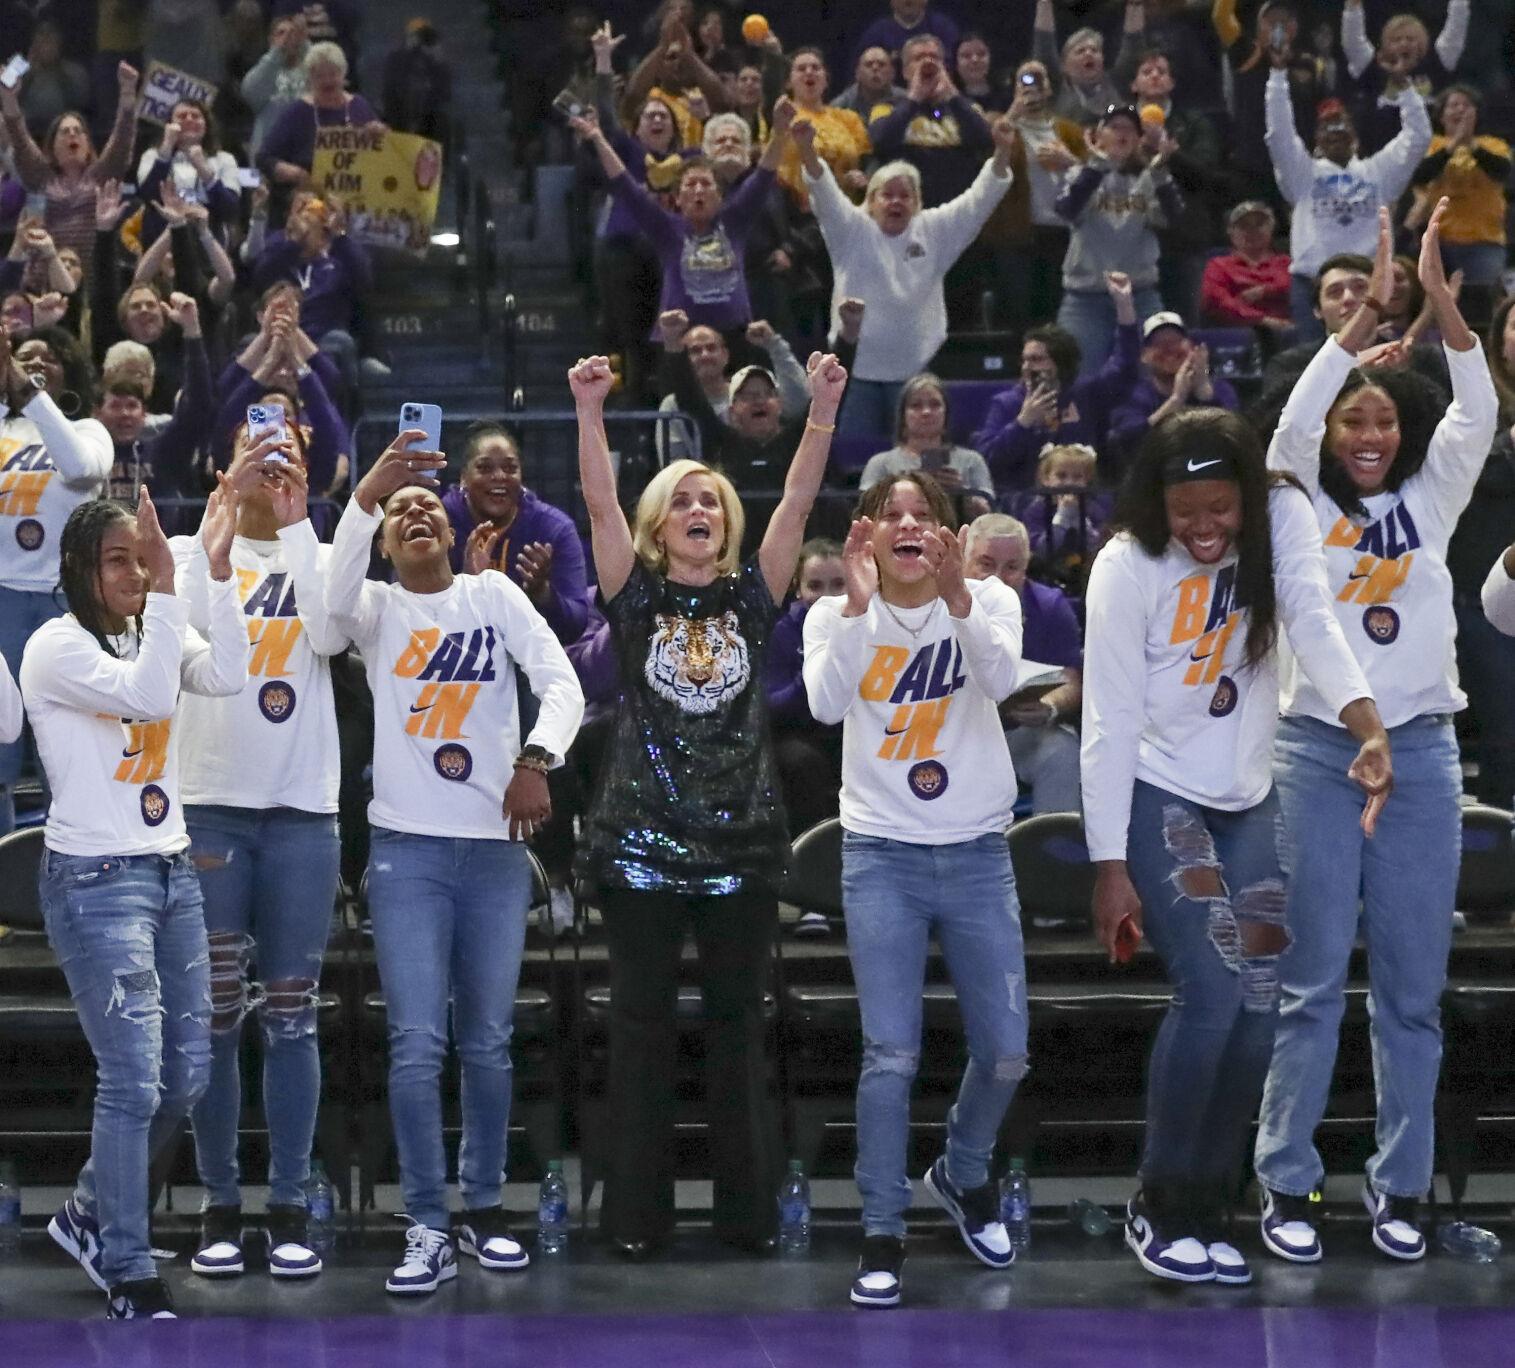 Photos: LSU women's basketball team is named No. 3 seed in NCAA Tournament | Baton Rouge